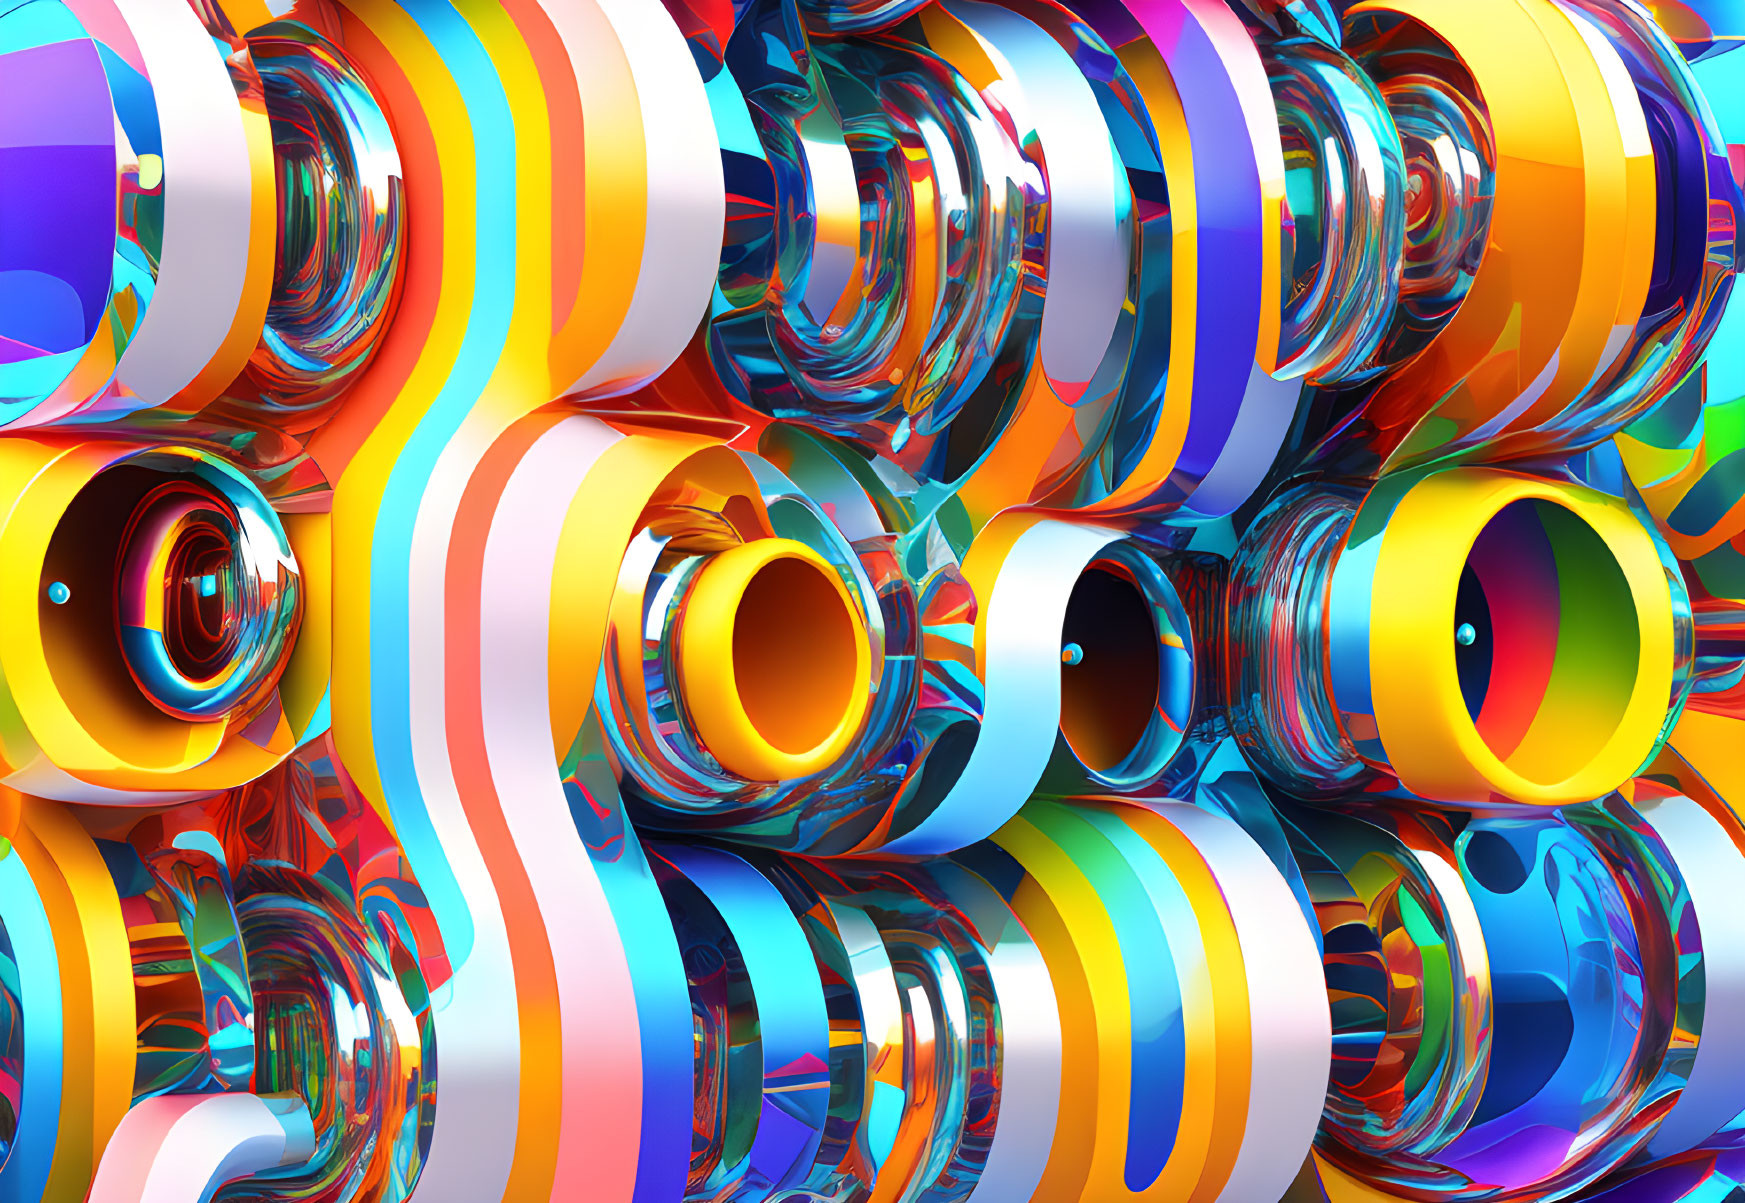 Colorful Swirling Tubular Shapes in Abstract Digital Art